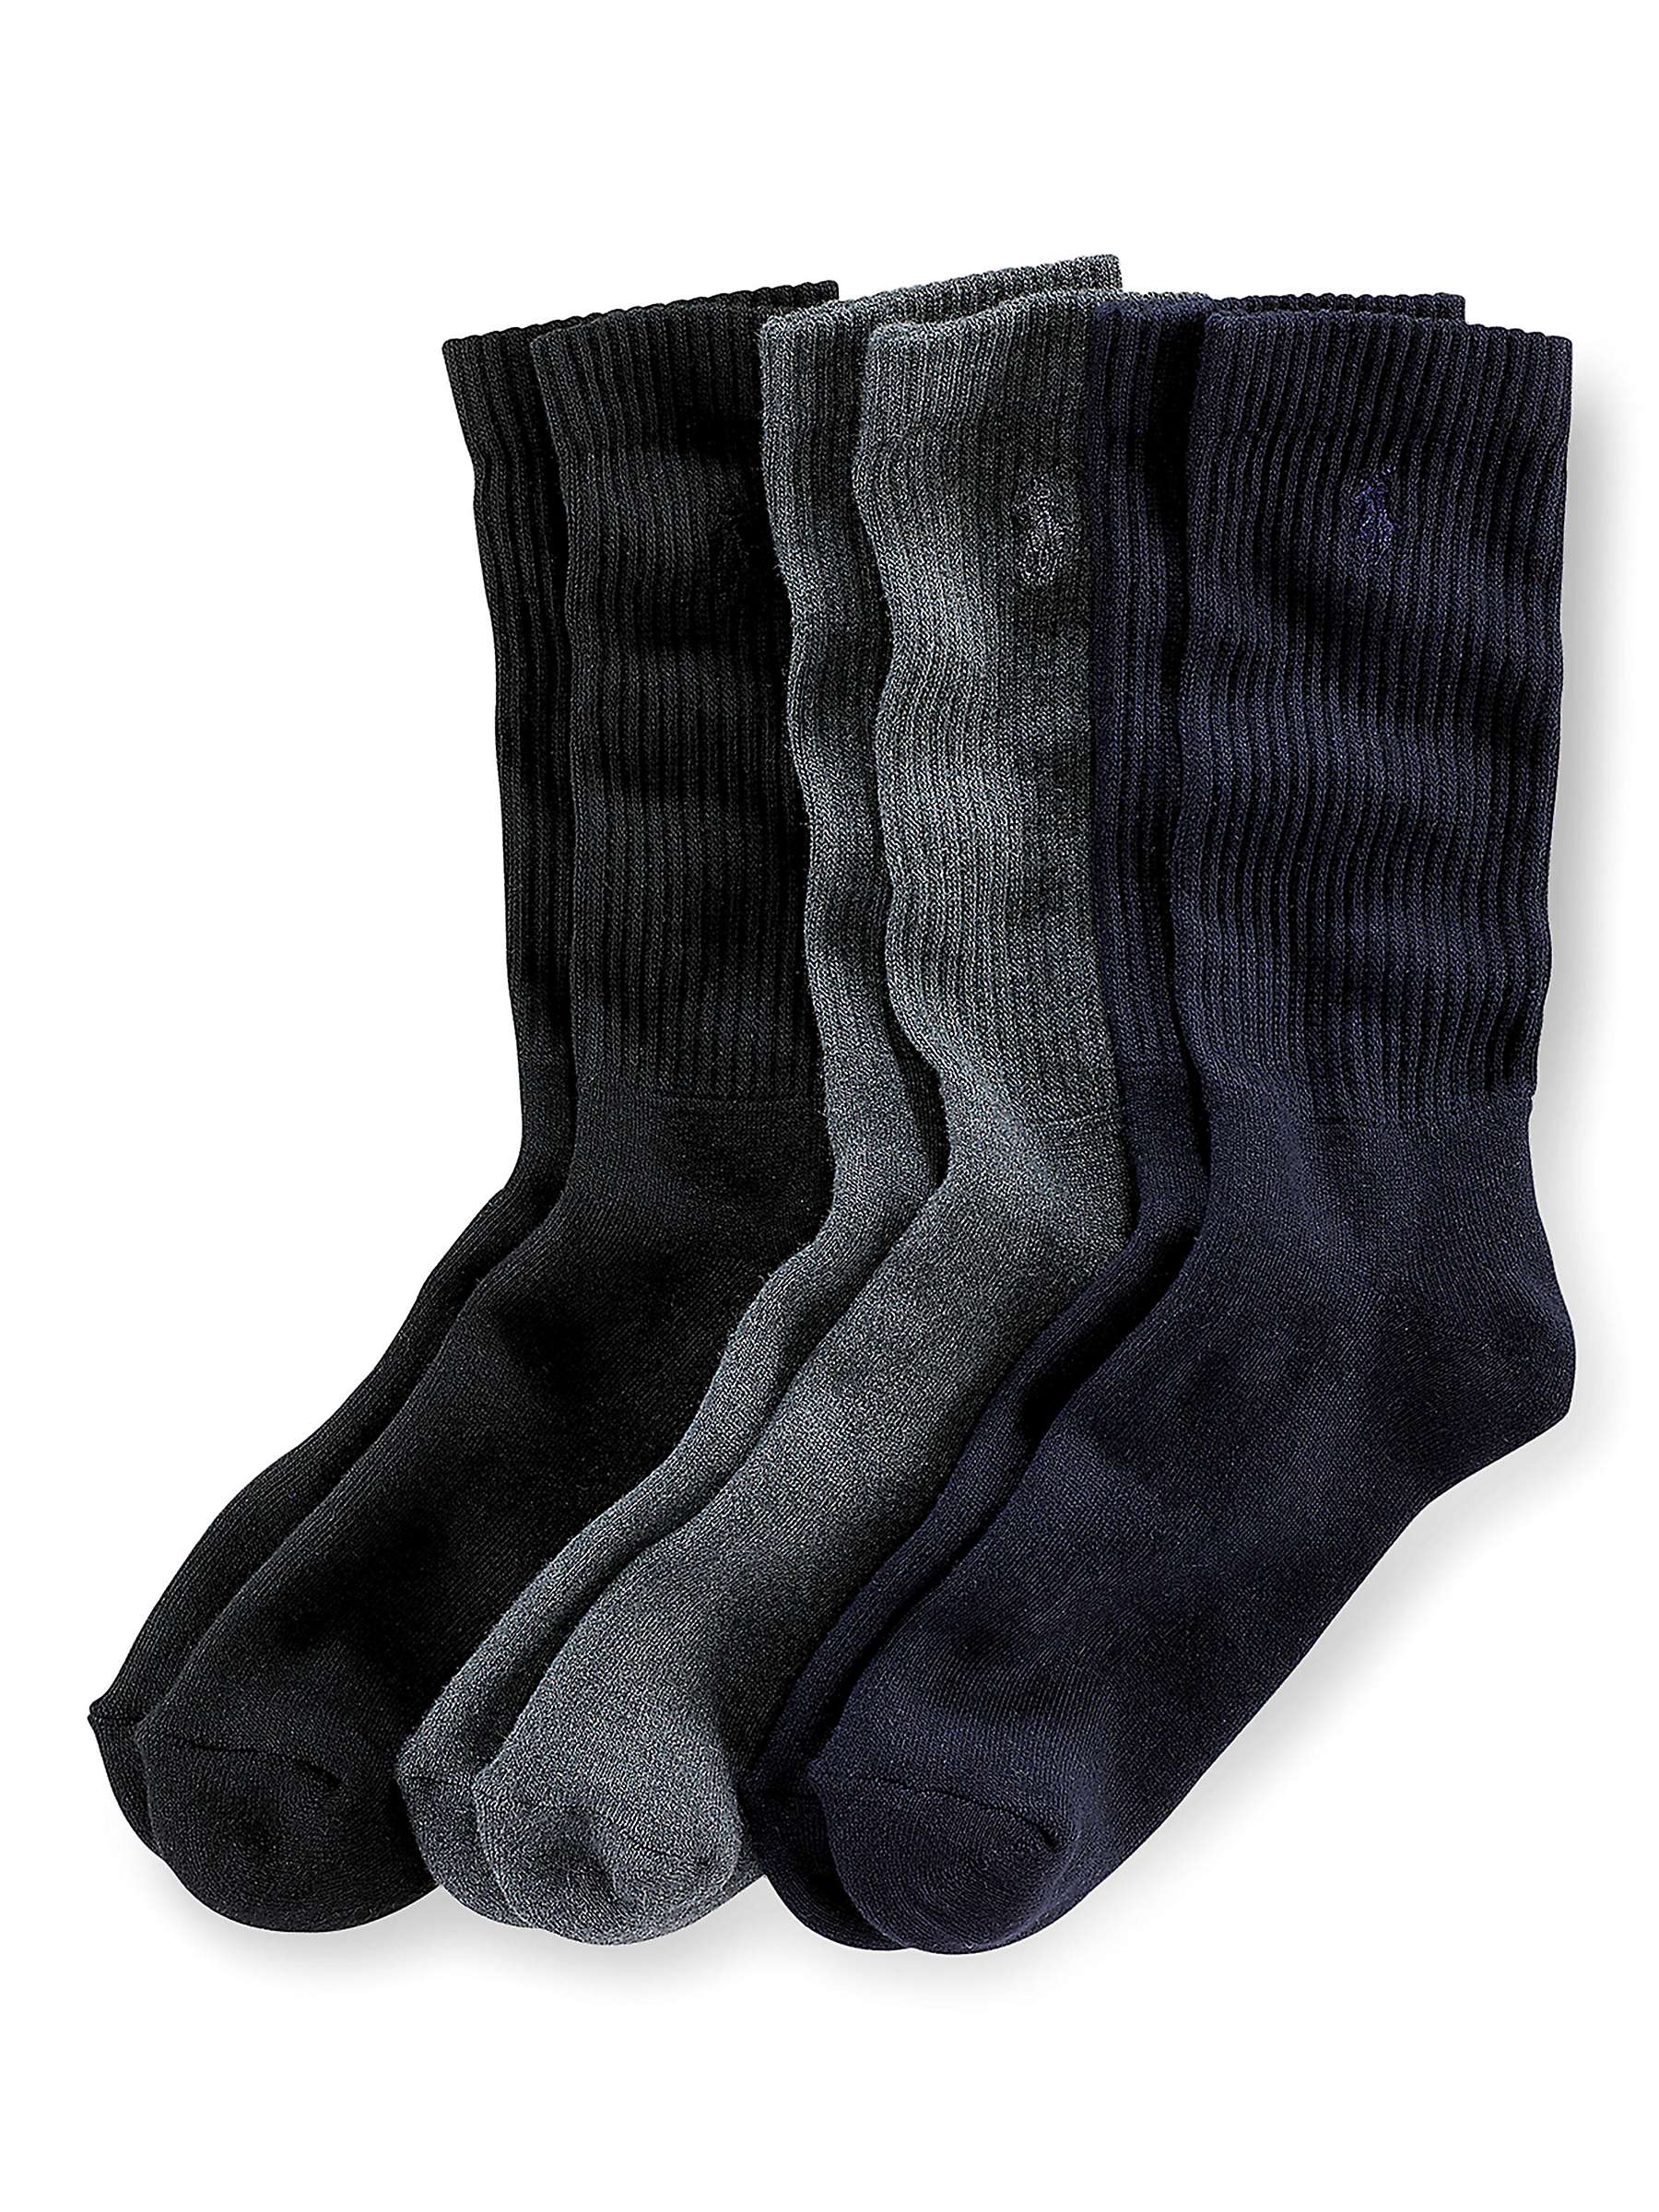 Buy Polo Ralph Lauren Cotton Rich Socks, Pack of 3, One Size, Black/Charcoal/Navy Online at johnlewis.com